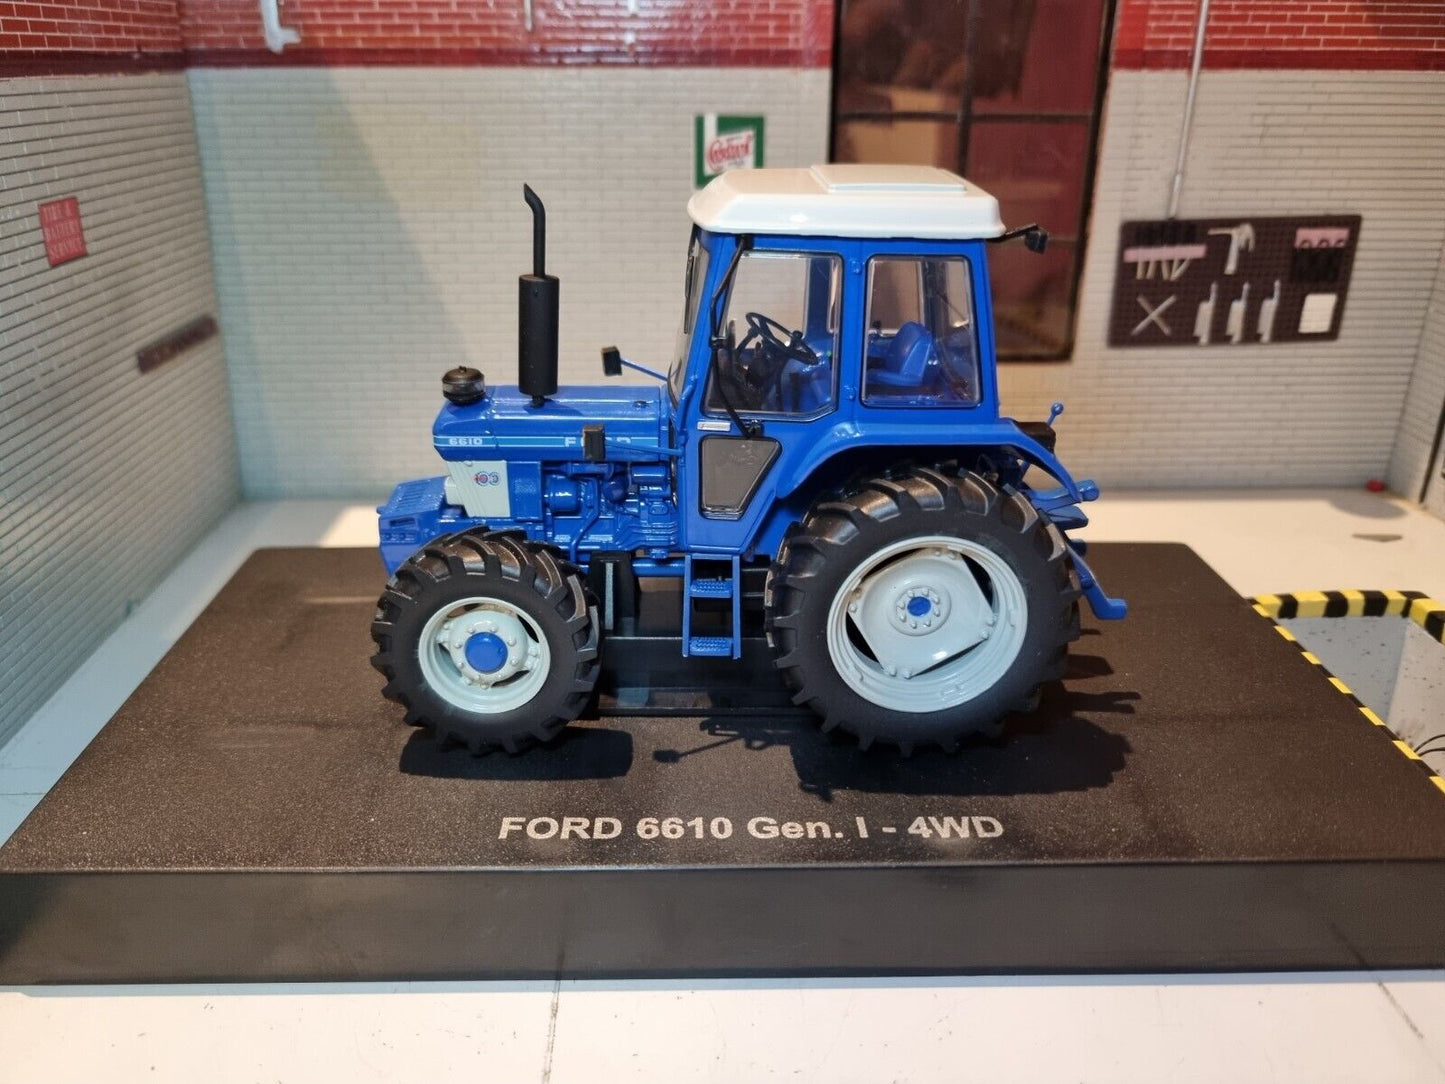 Ford 6610 Gen 1 Tractor 4WD 1982-1993 UH5367 Universal Hobbies 1:32